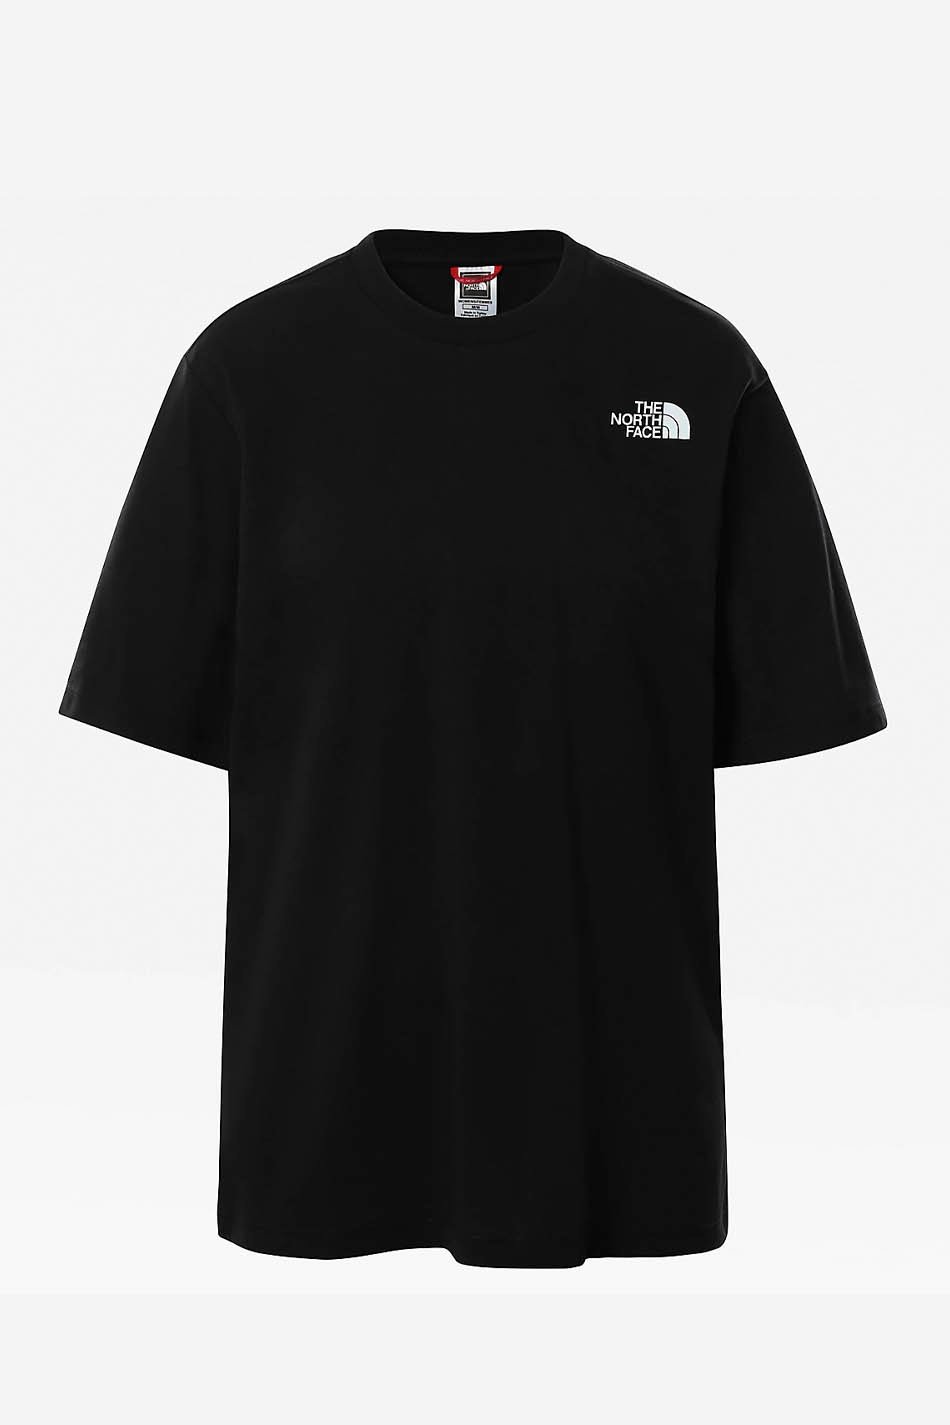 Black The North Face T-shirt